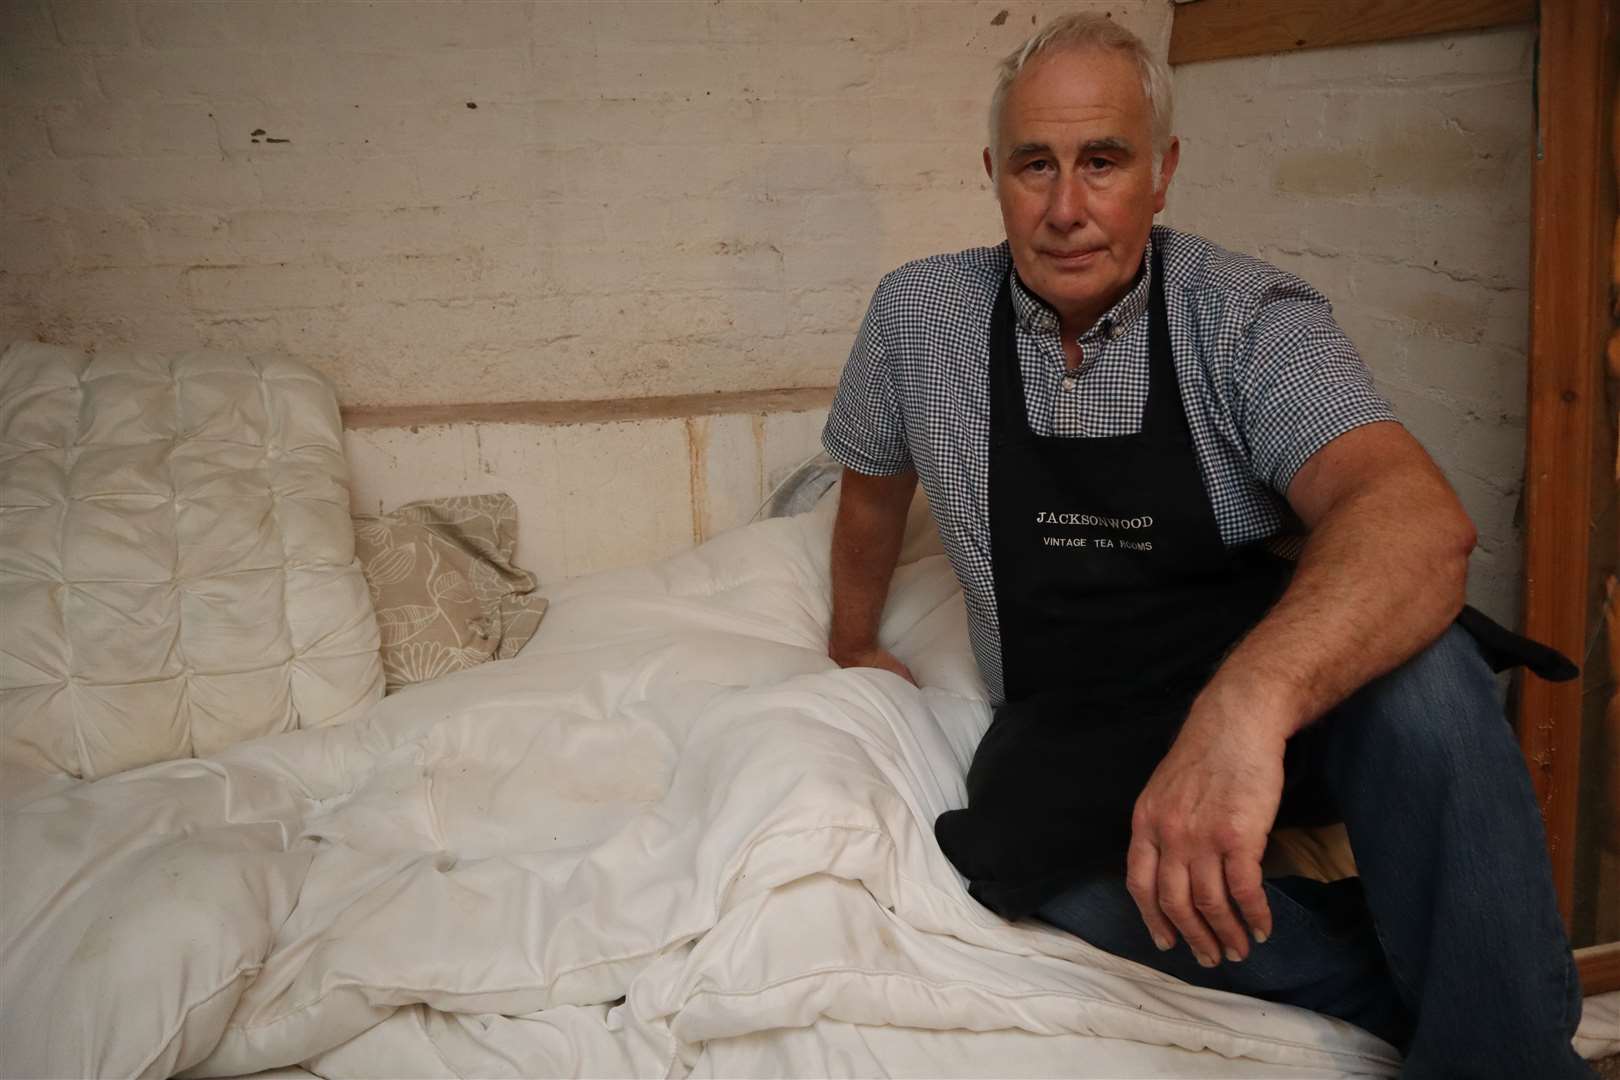 Sheppey businessman Steve Jackson shows where he slept in the basement of his Jacksonwood tea rooms in Sheerness High Street. Picture: John Nurden